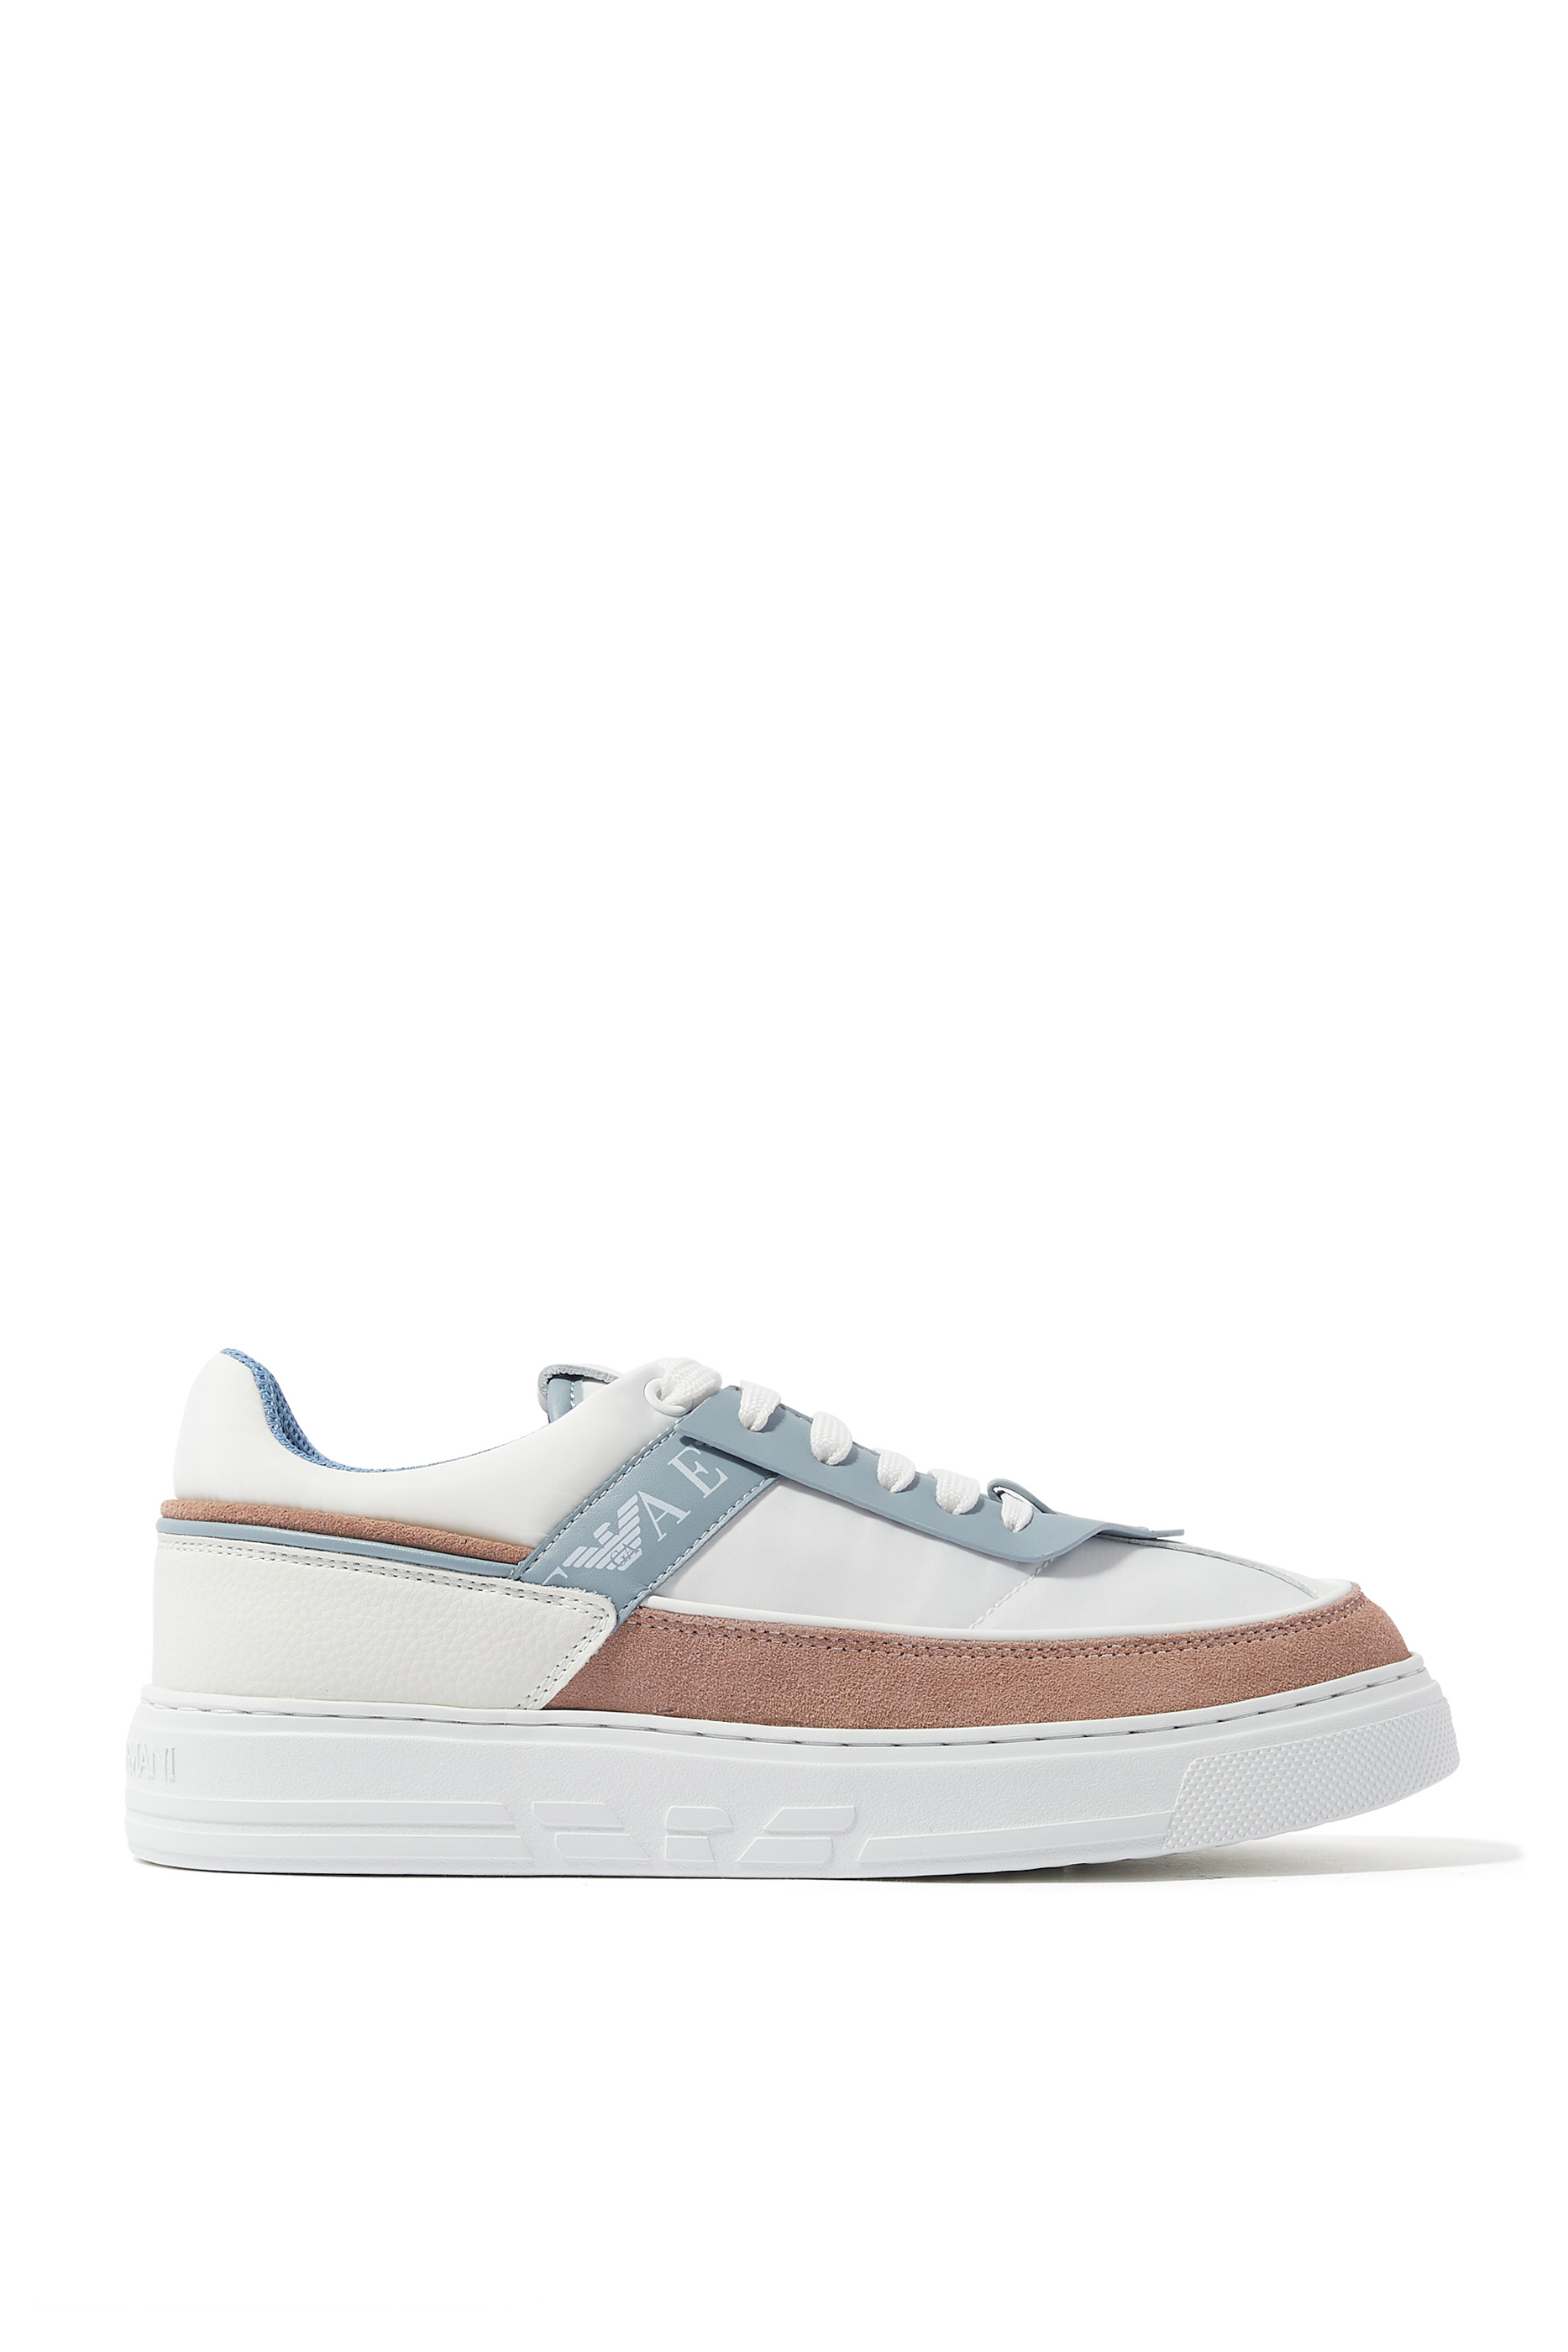 Buy Emporio Armani Lace-Up Suede & Nylon Sneakers for Womens